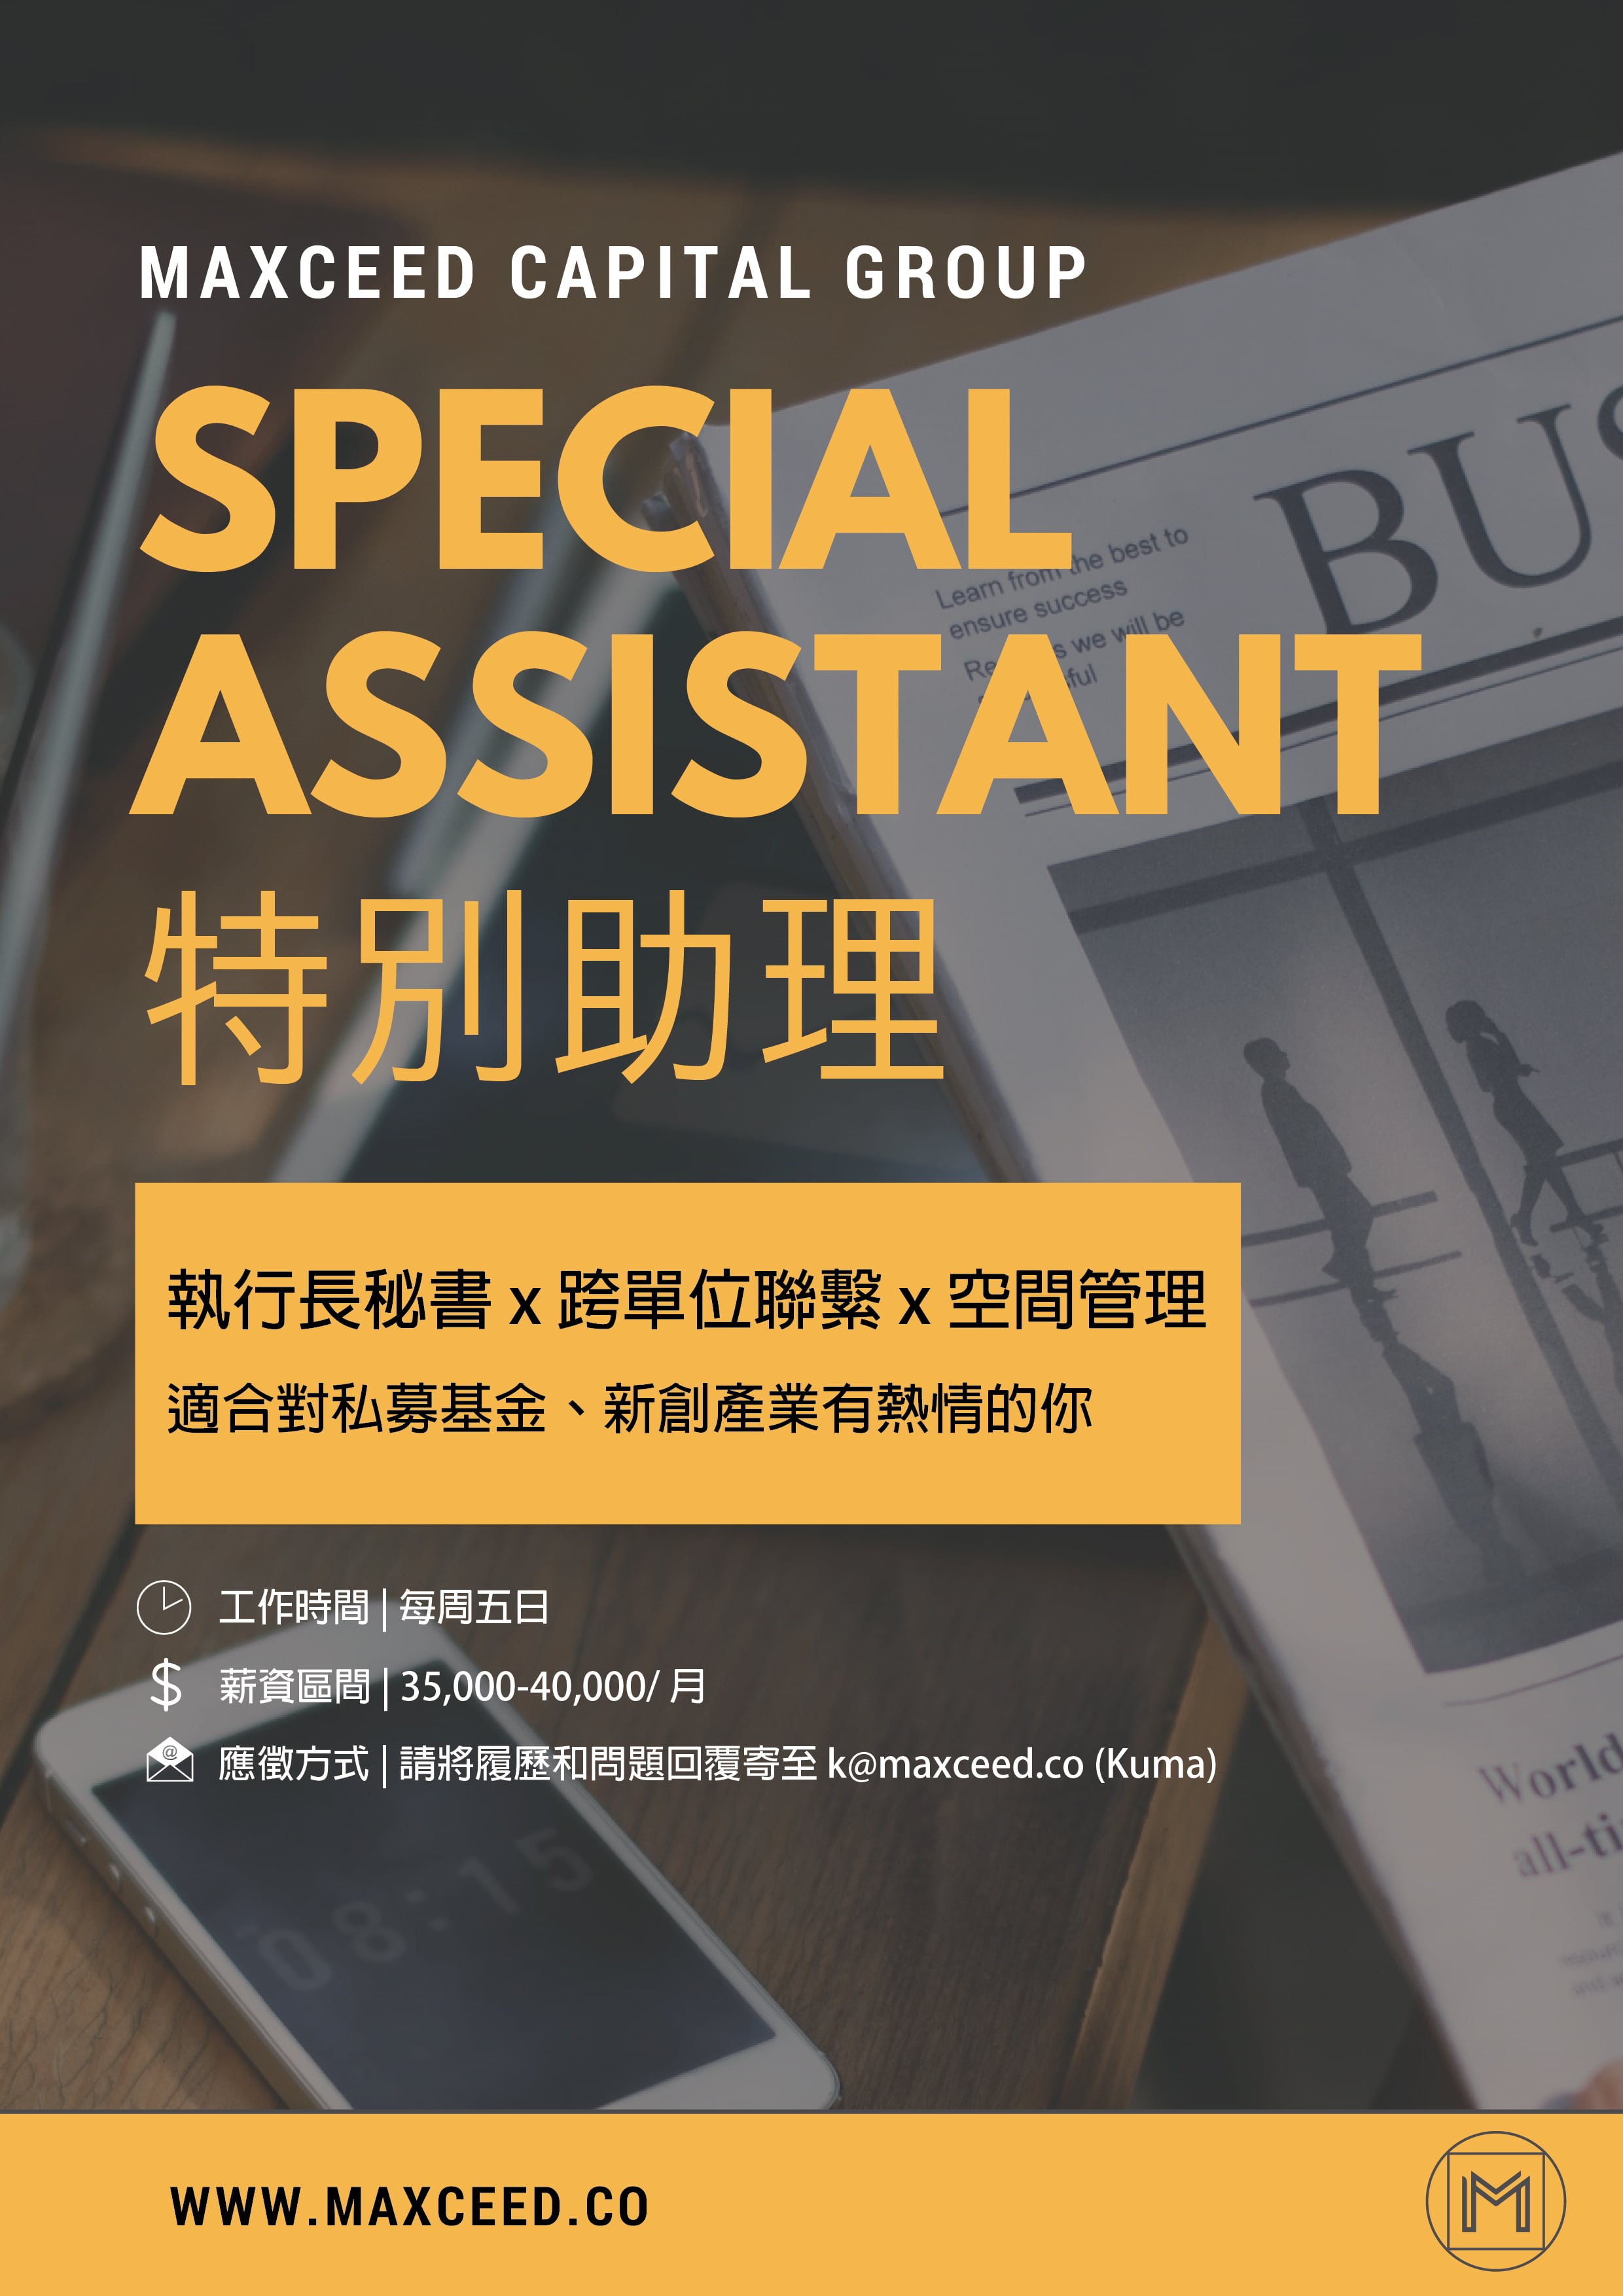 Special Assistant_Maxceed Capital Group-01-01-01-min